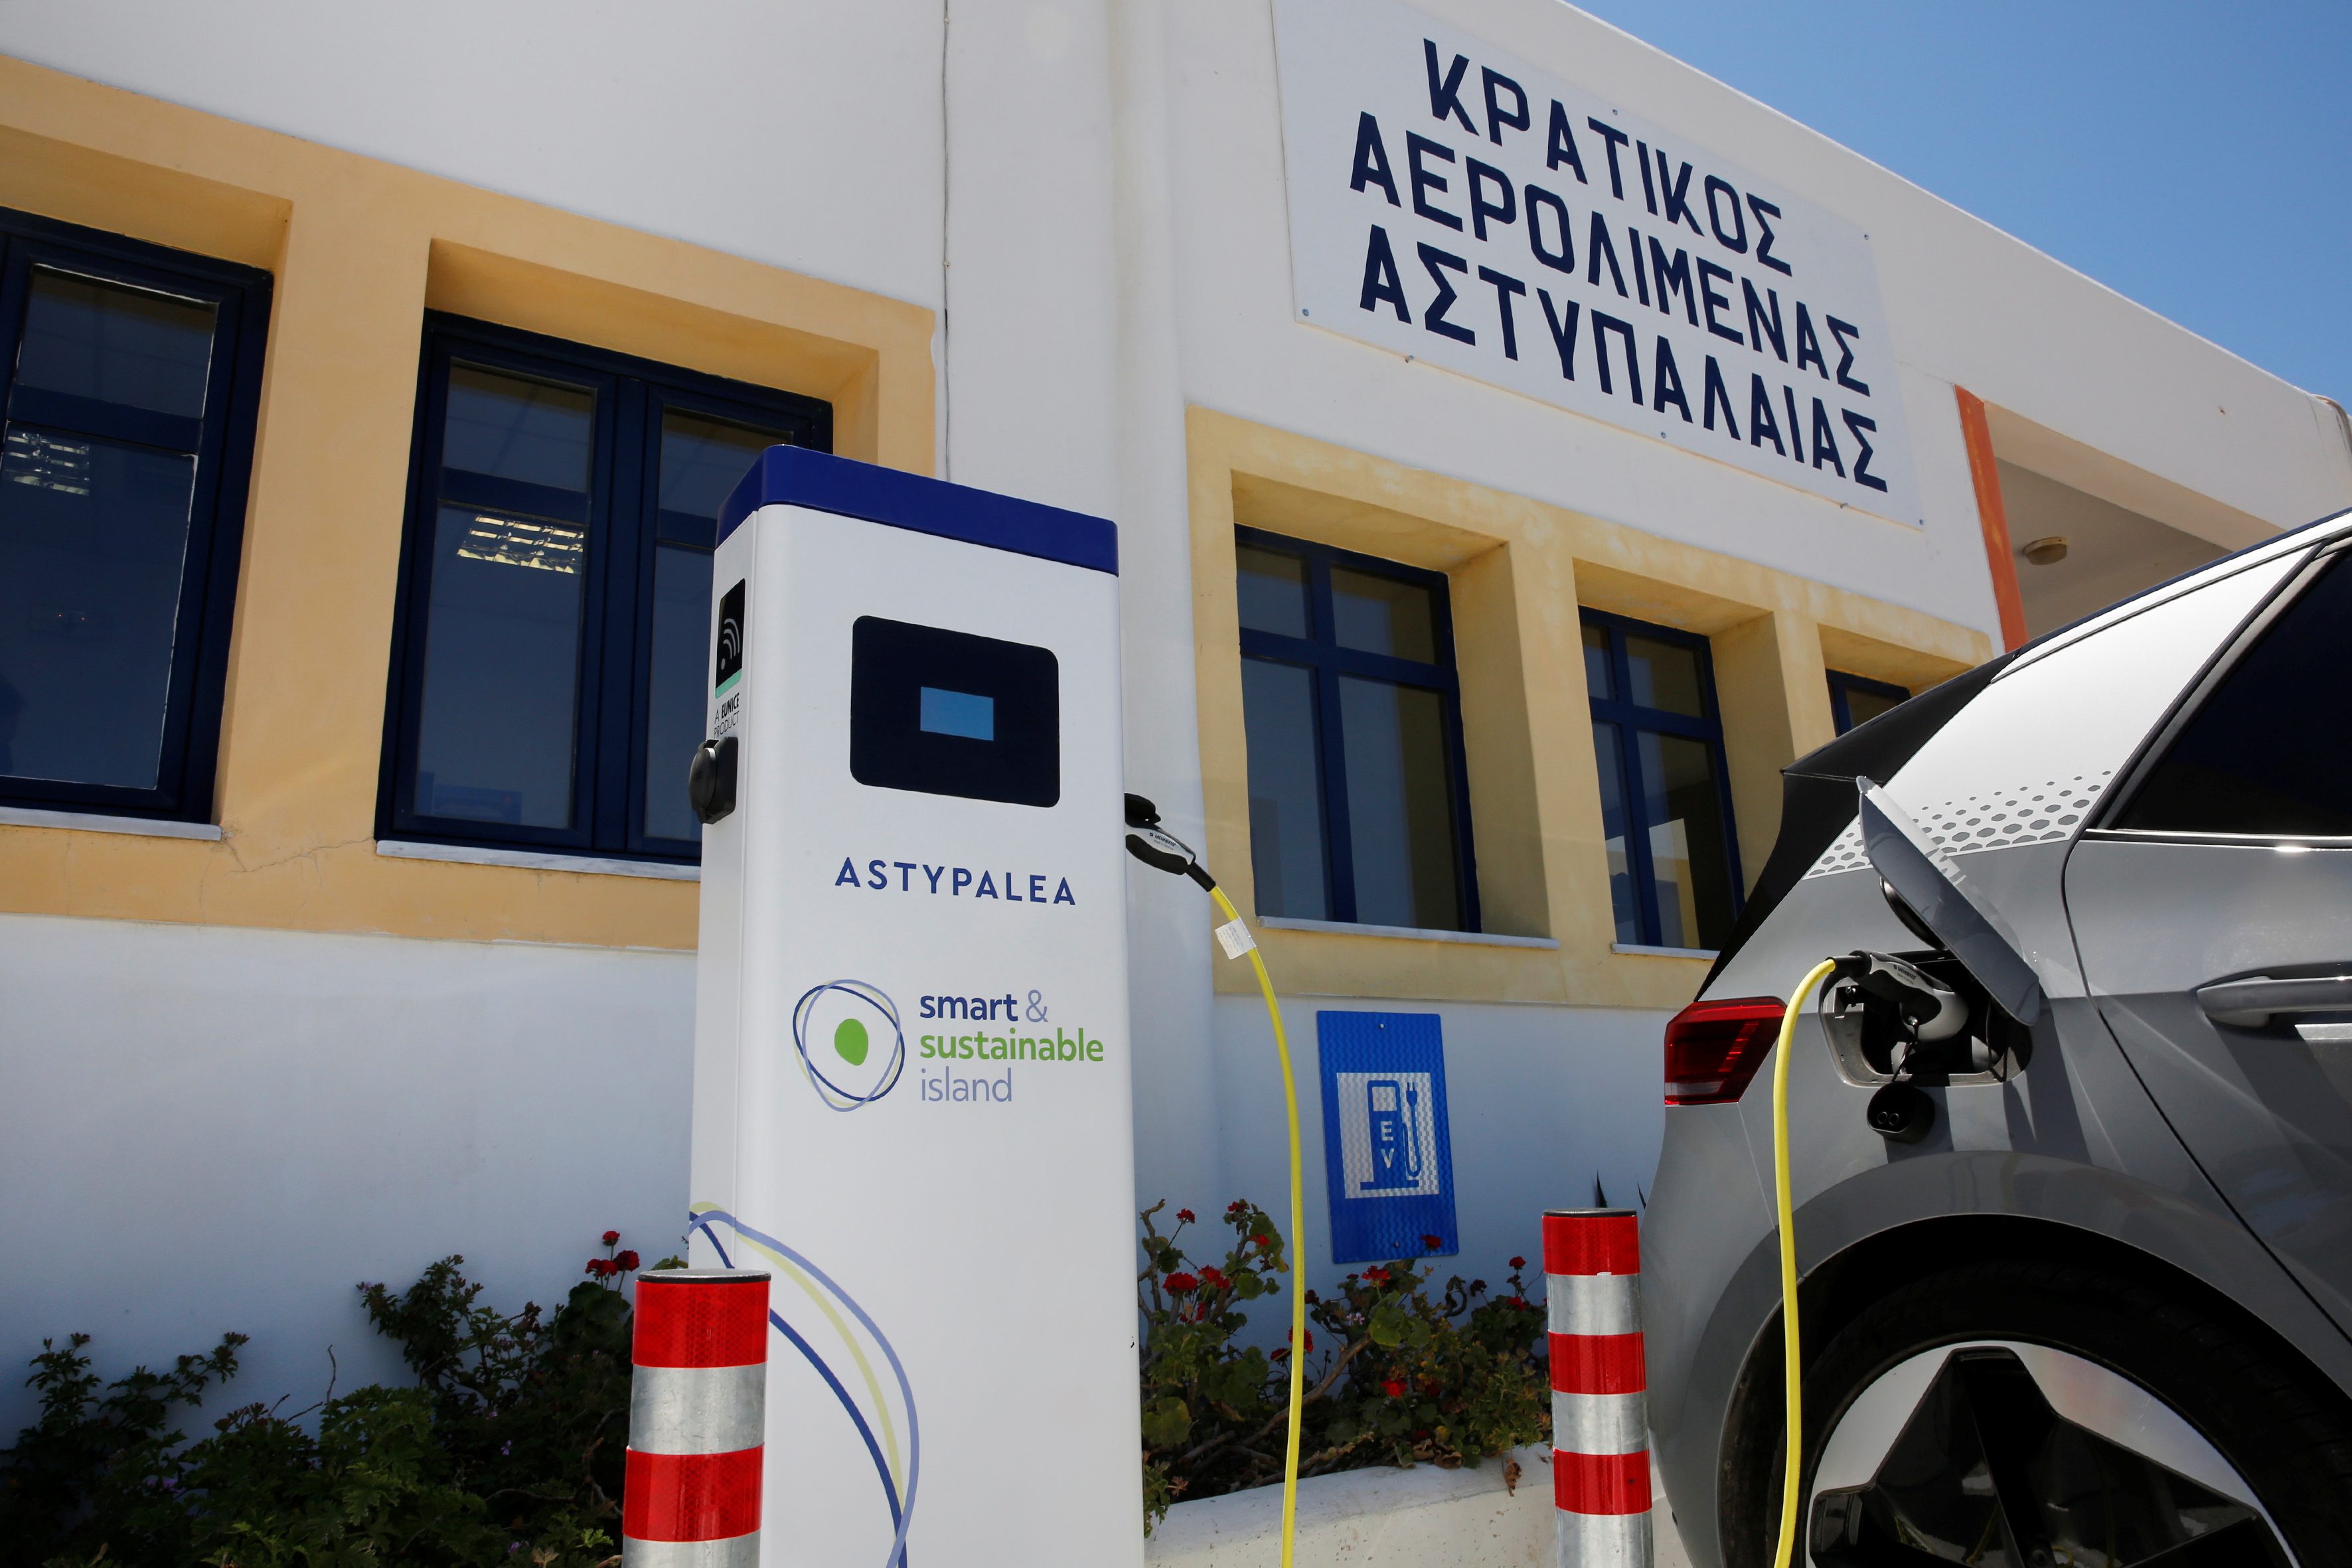 A Volkswagen ID.4 electric car is charged at the airport on the island of Astypalea